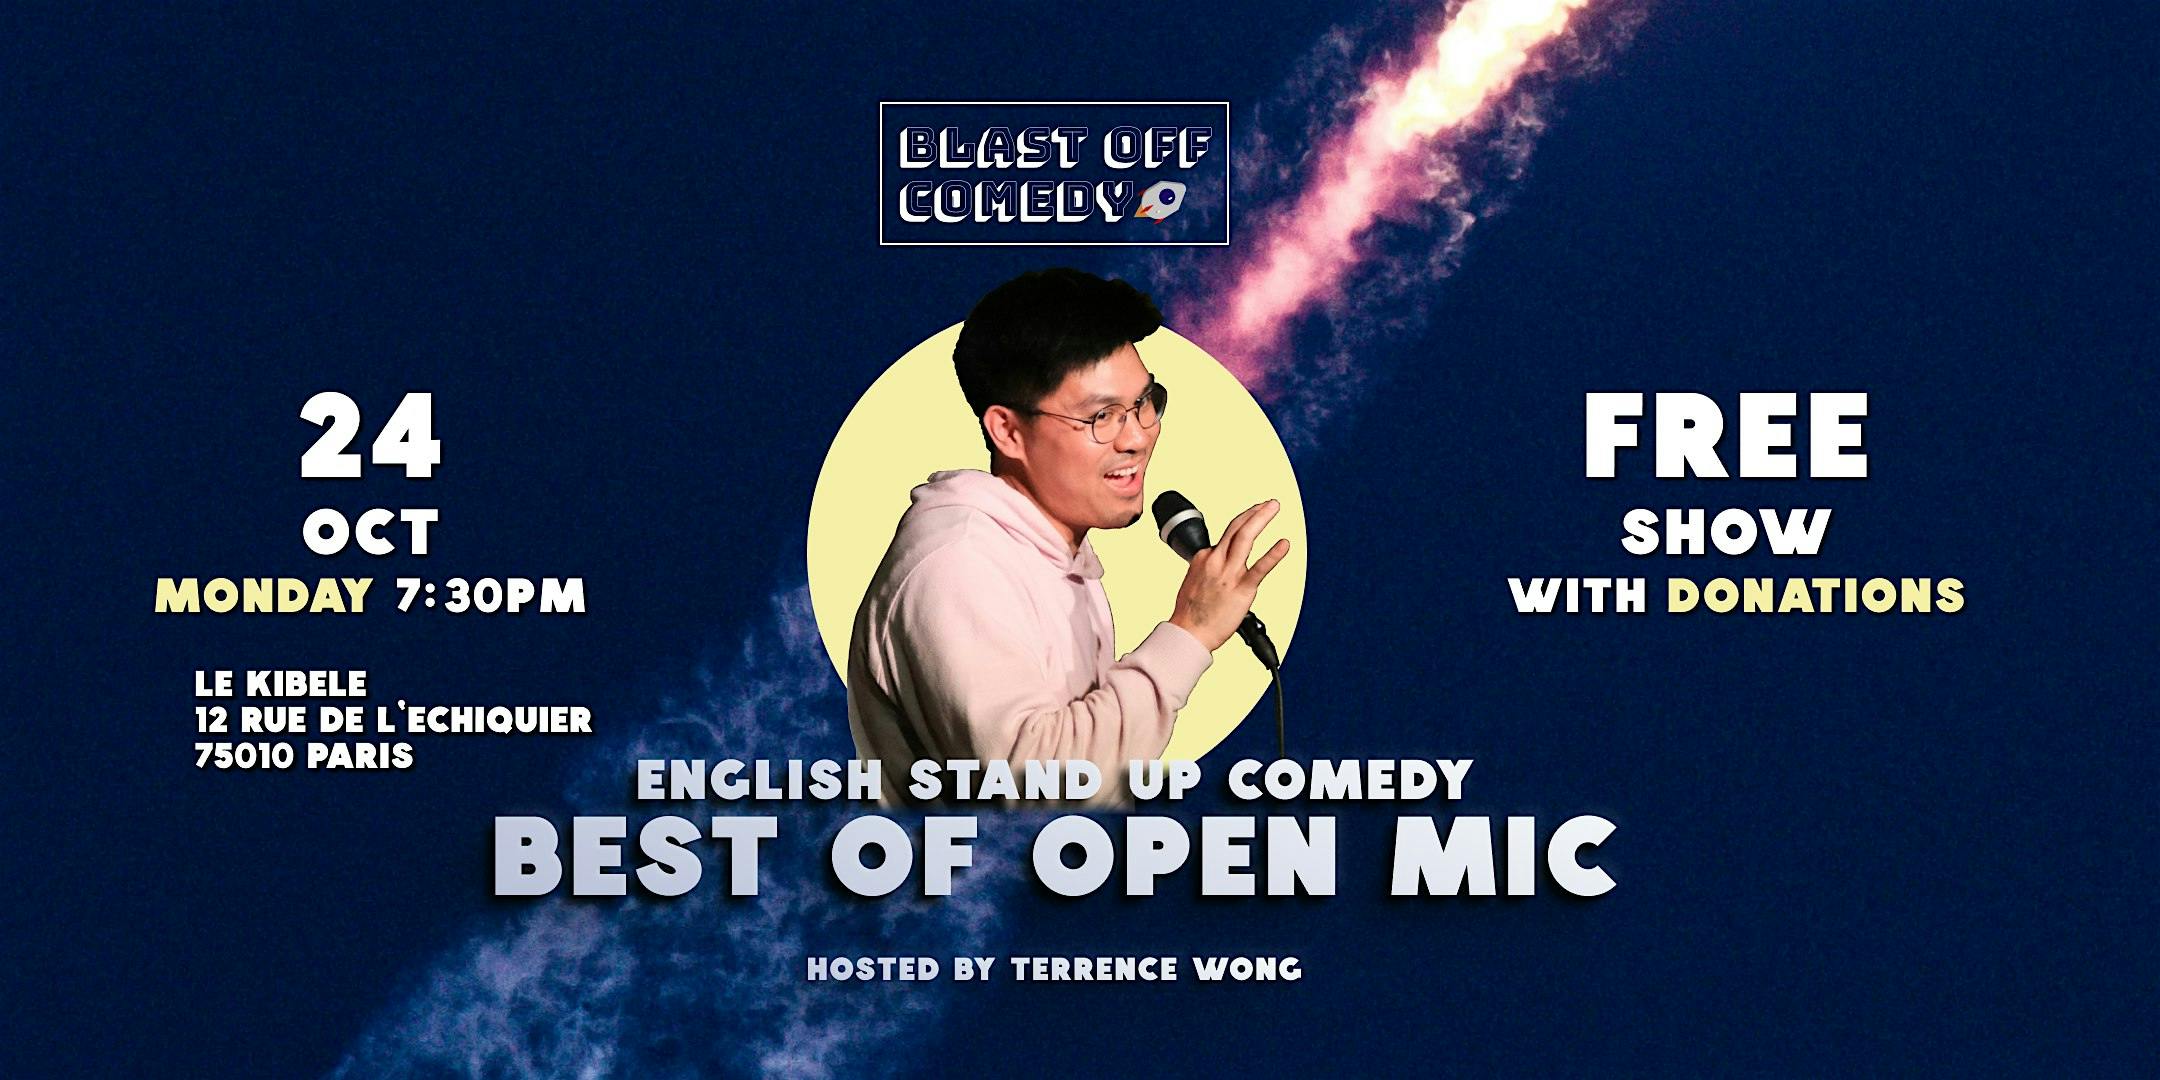 English Stand Up Comedy Best of Open Mic 24.10 - Blast Off Comedy logo